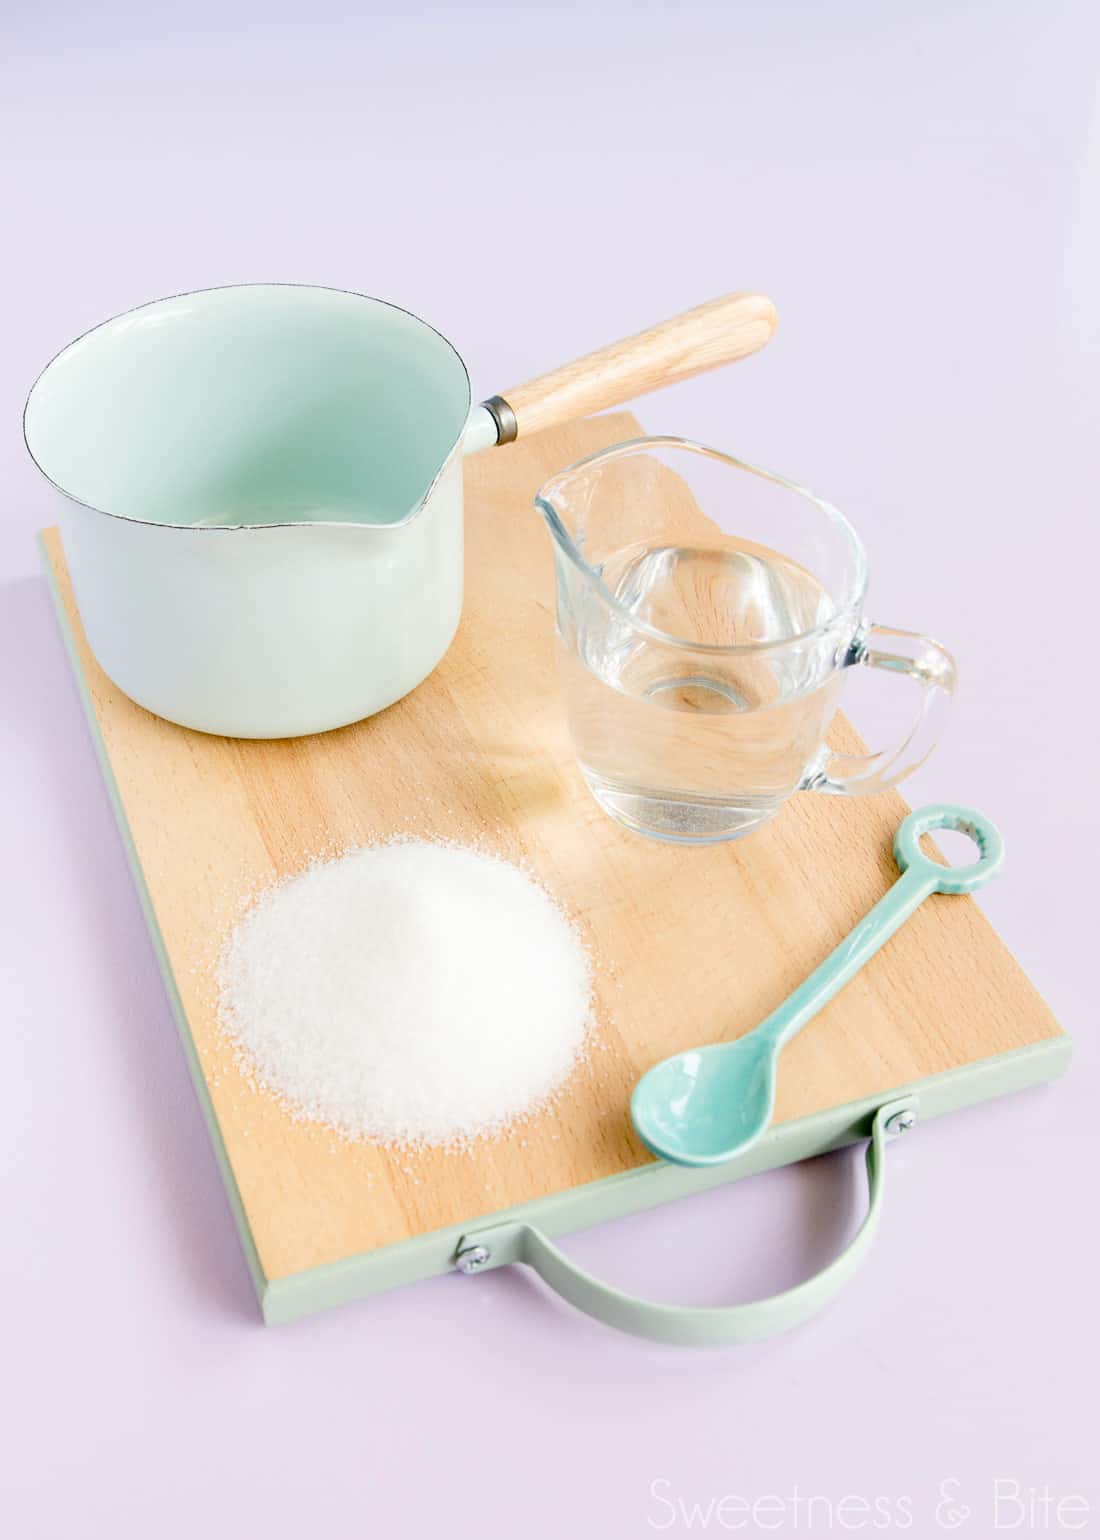 Sugar syrup ingredients and equipment - sugar, water, a small pan and a spoon.